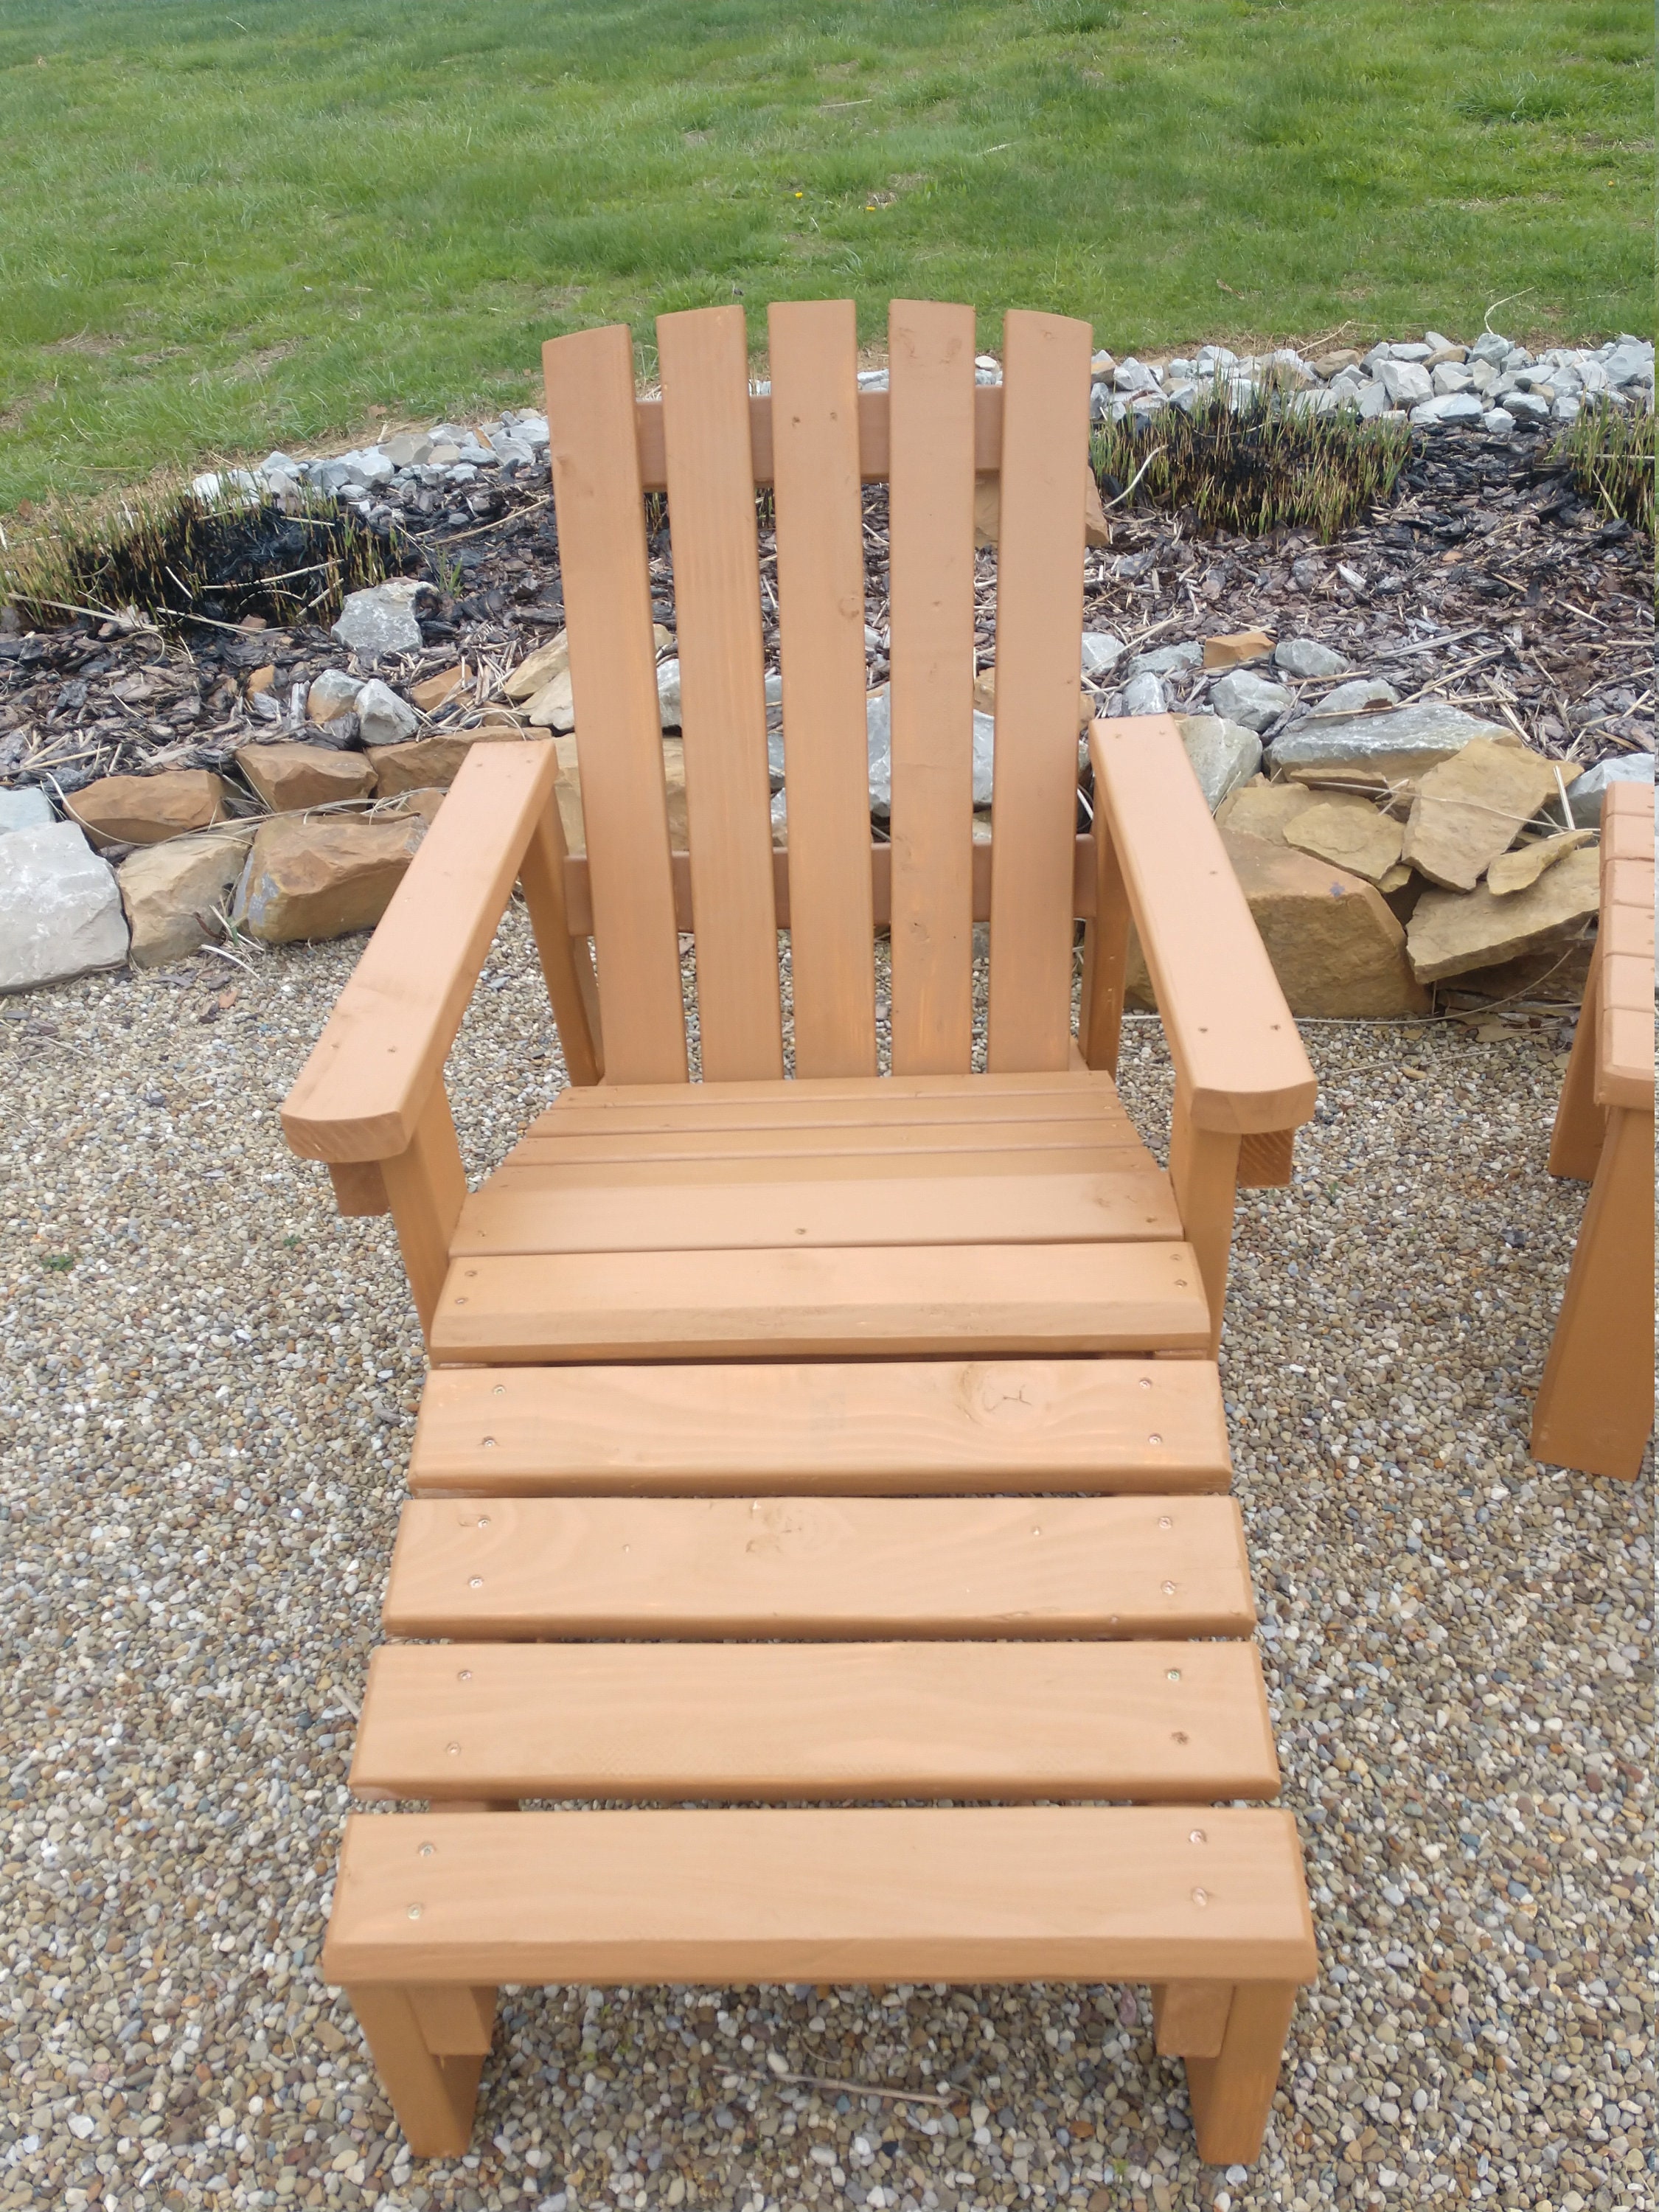 2x4 Foot Stool Plans for 2x4 Adirondack Chair (Download Now) 